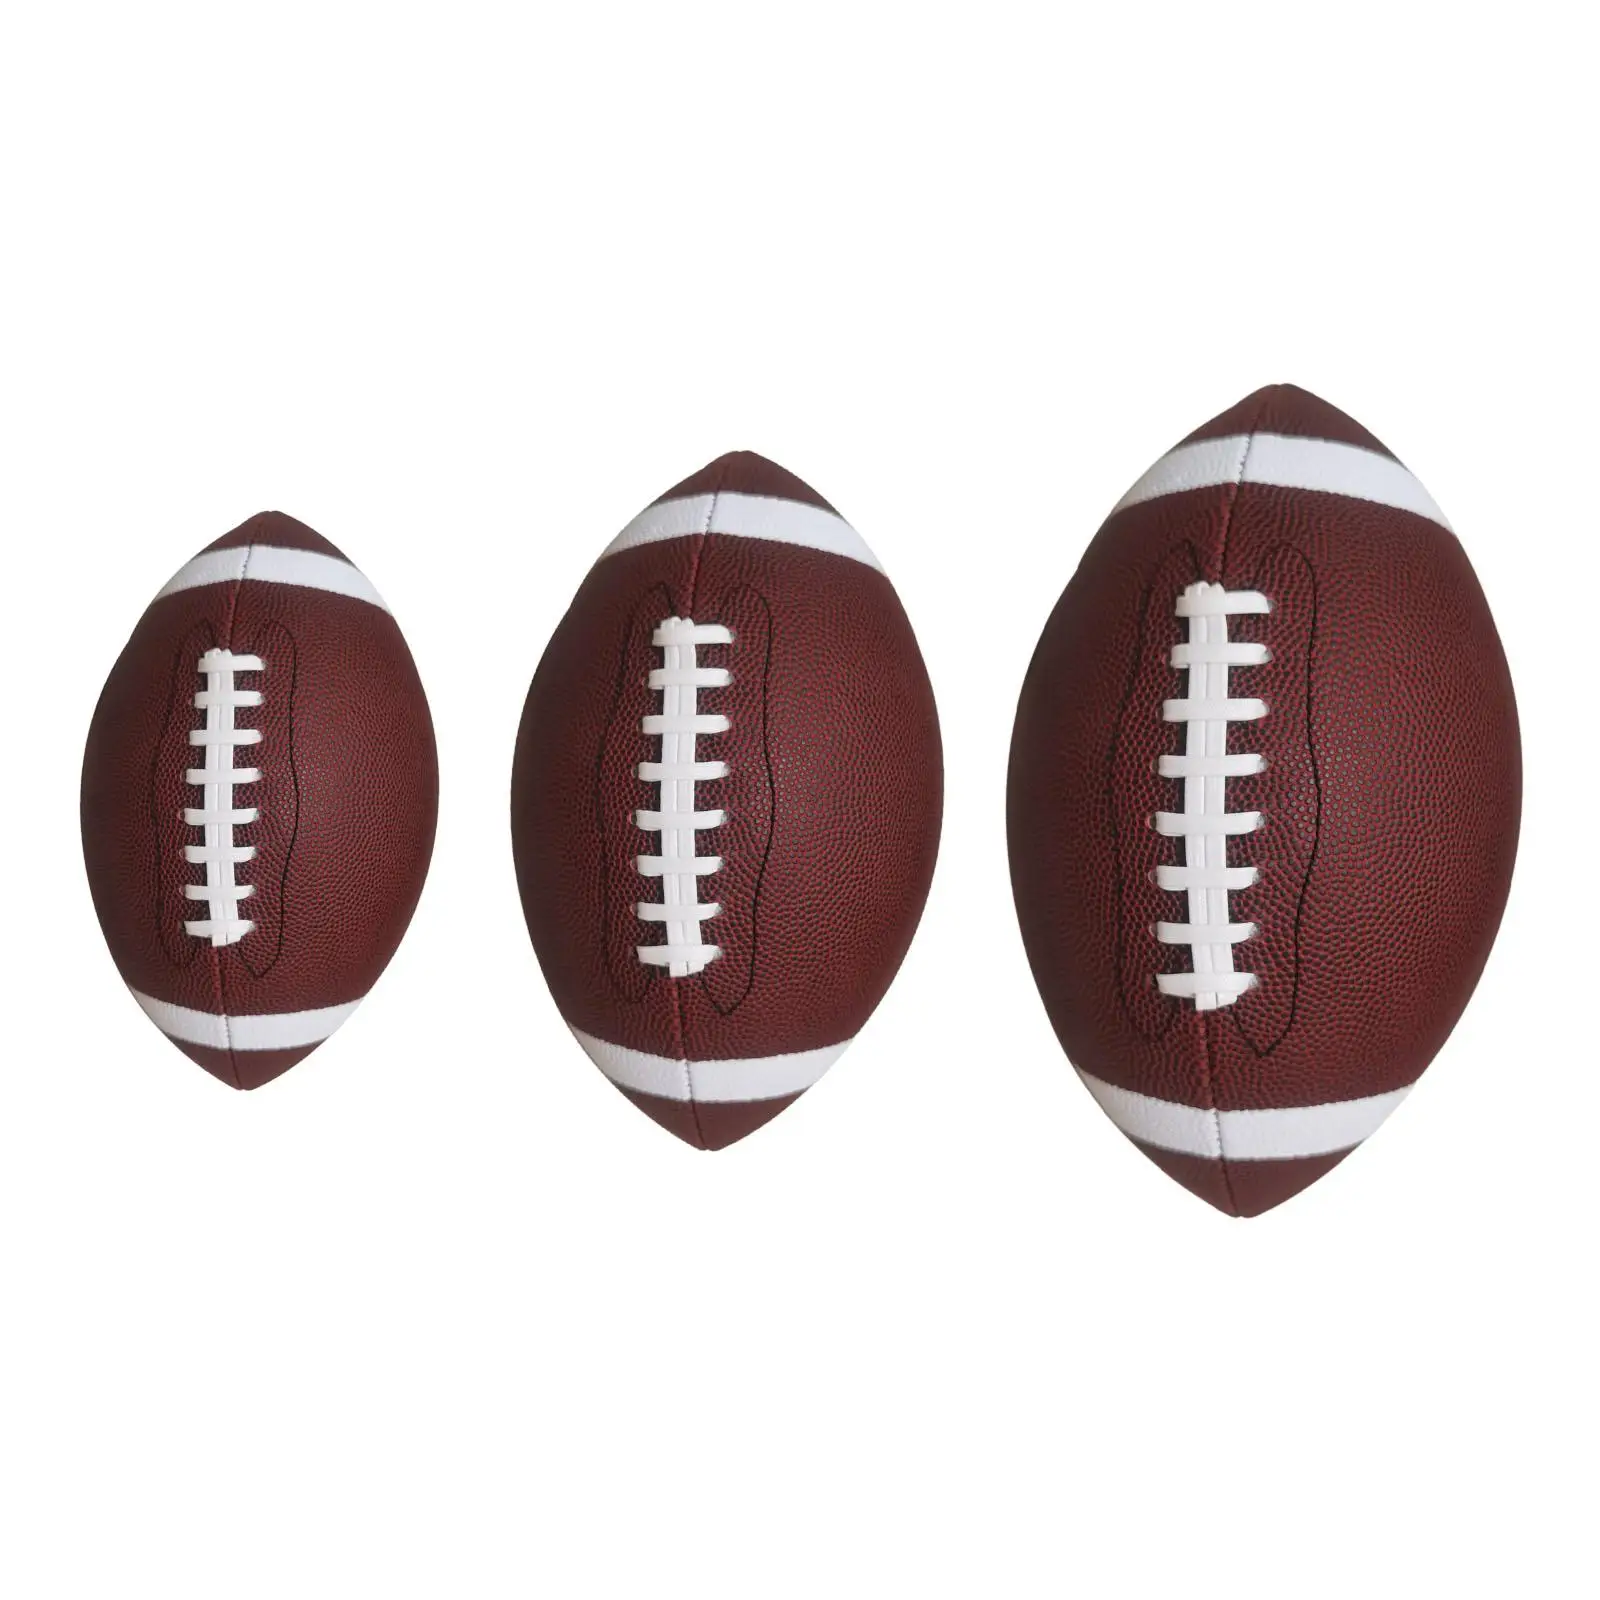 

American Football Official Football Portable Training Comfortable Standard Competition Ball Rugby Ball for Game Indoor Sports